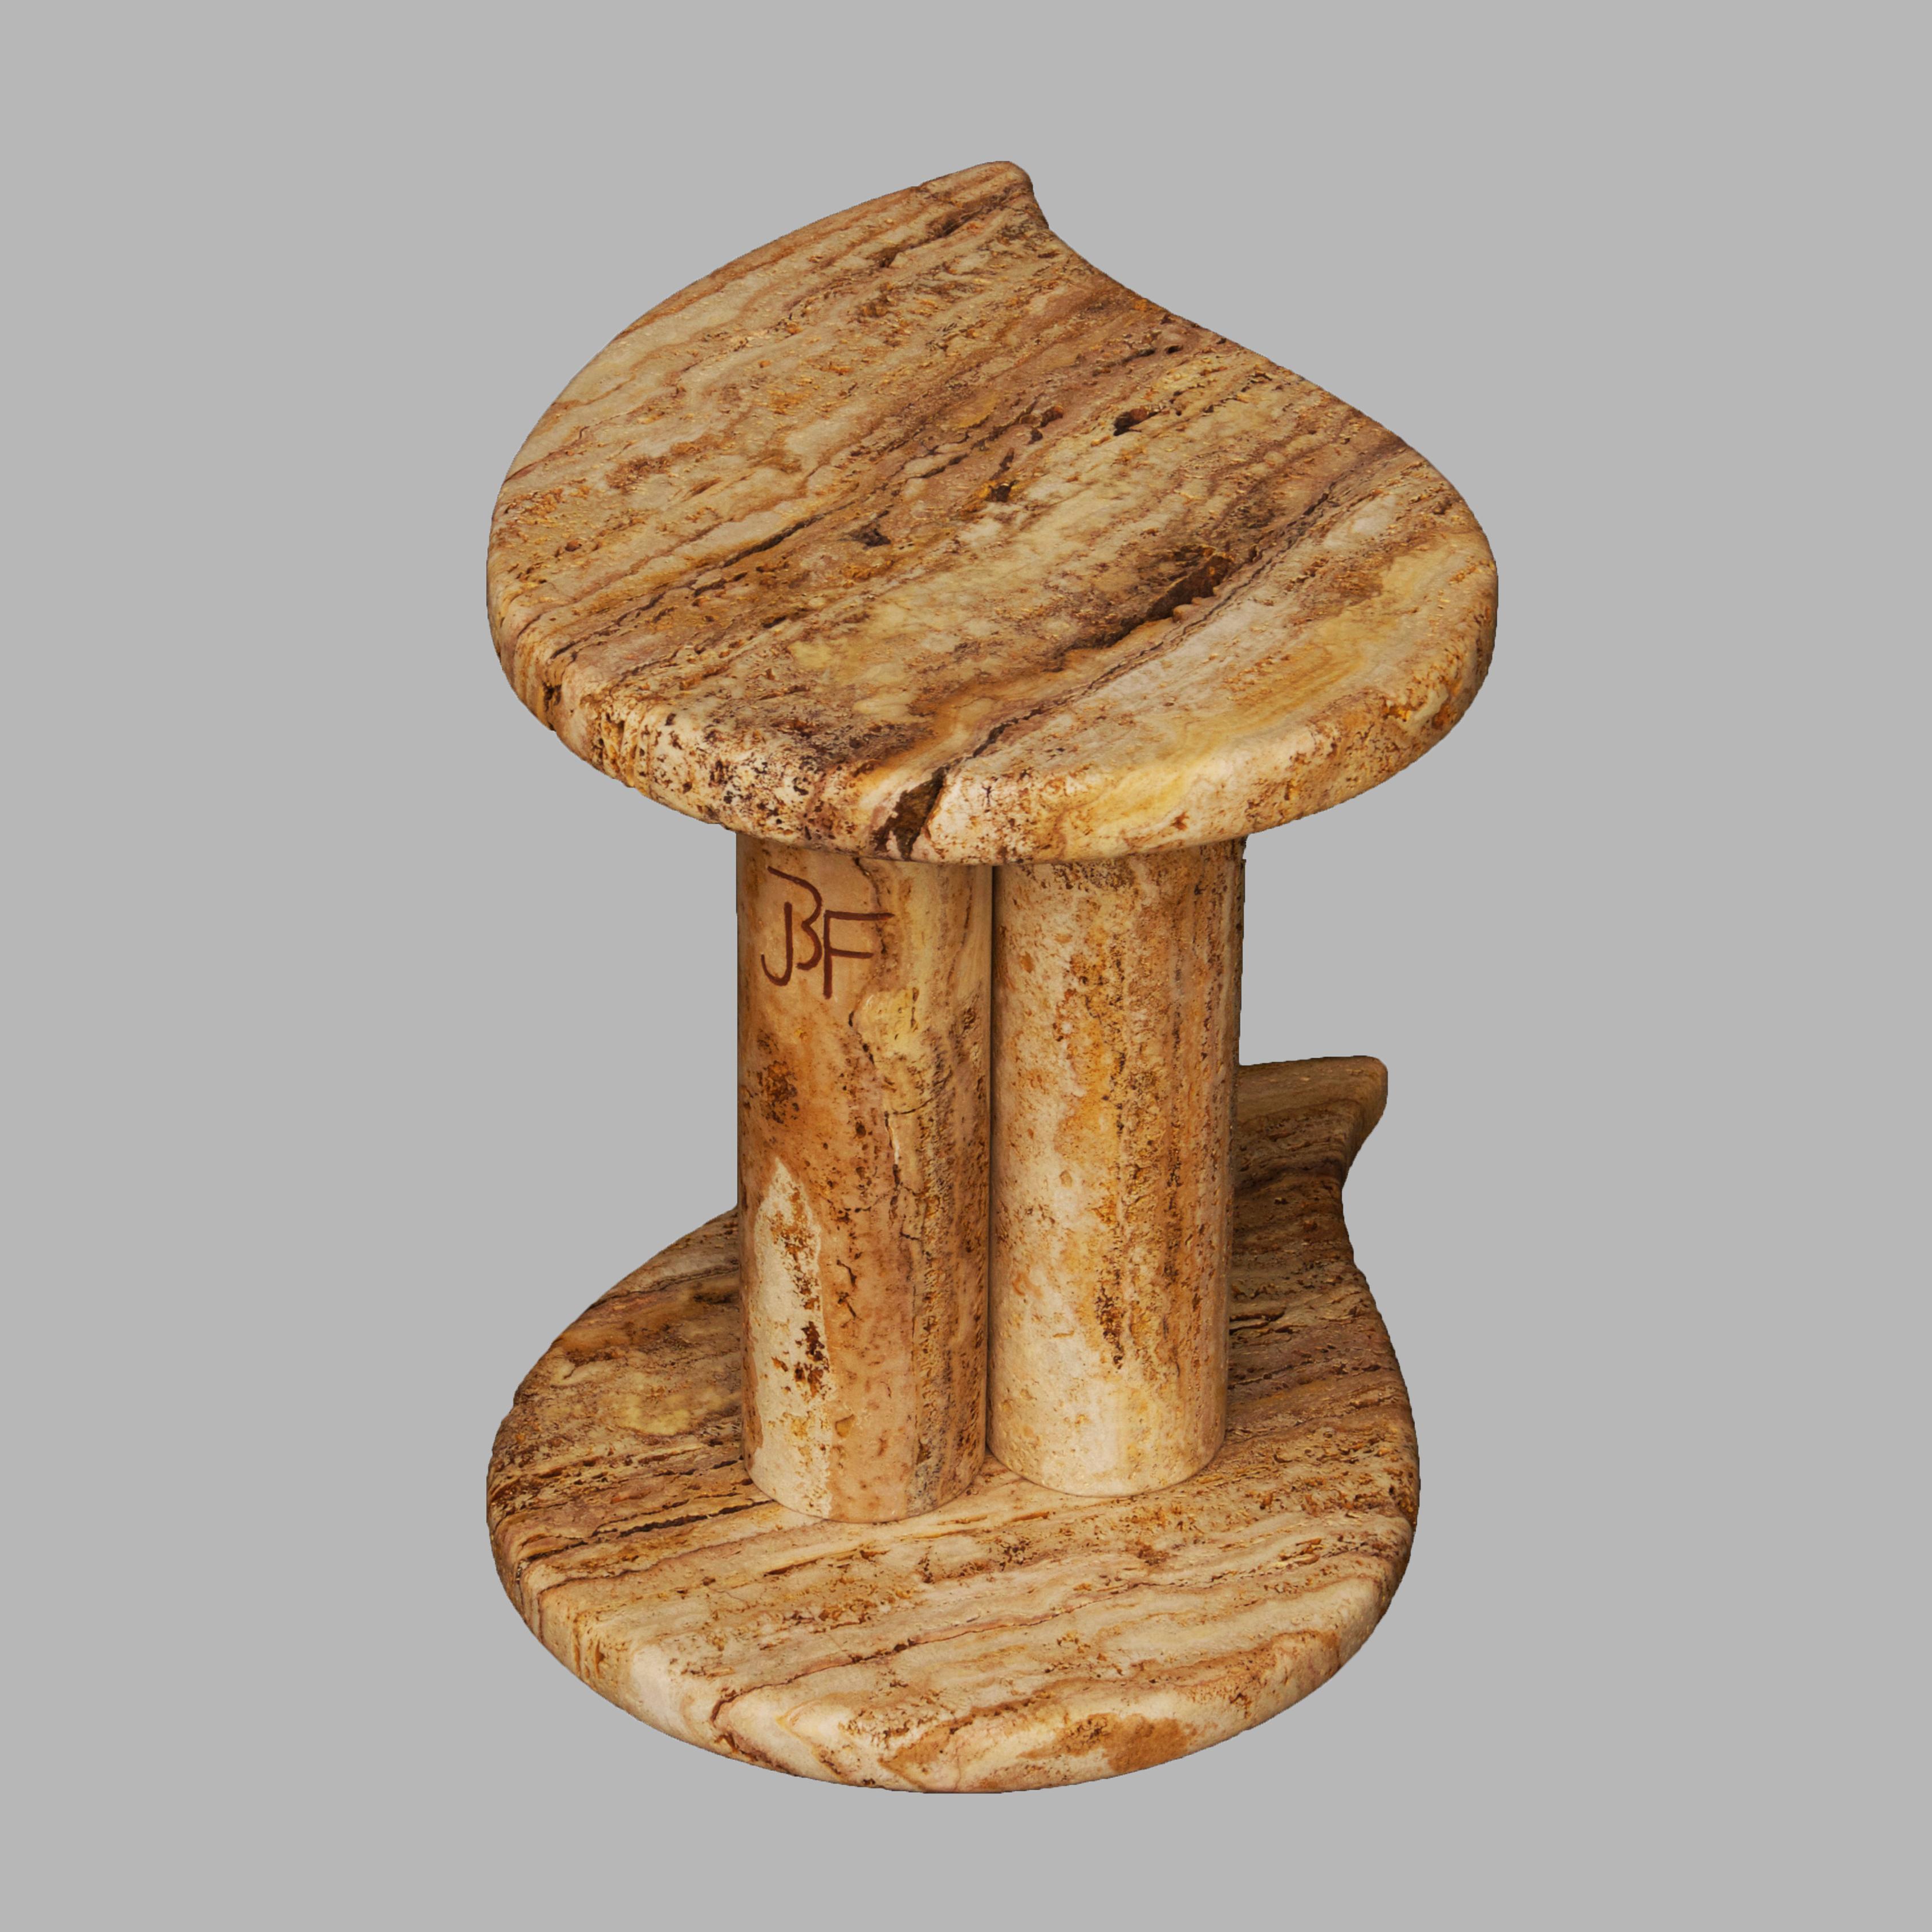 Double drop side table by Jean-Fréderic Bourdier
Dimensions: D 52 x W 35 x H 40 cm
Materials: Travertine.

Mostly guided by his sculptor skills JFB and his life time strong attraction for nature, has started out this collection in 2021 as he